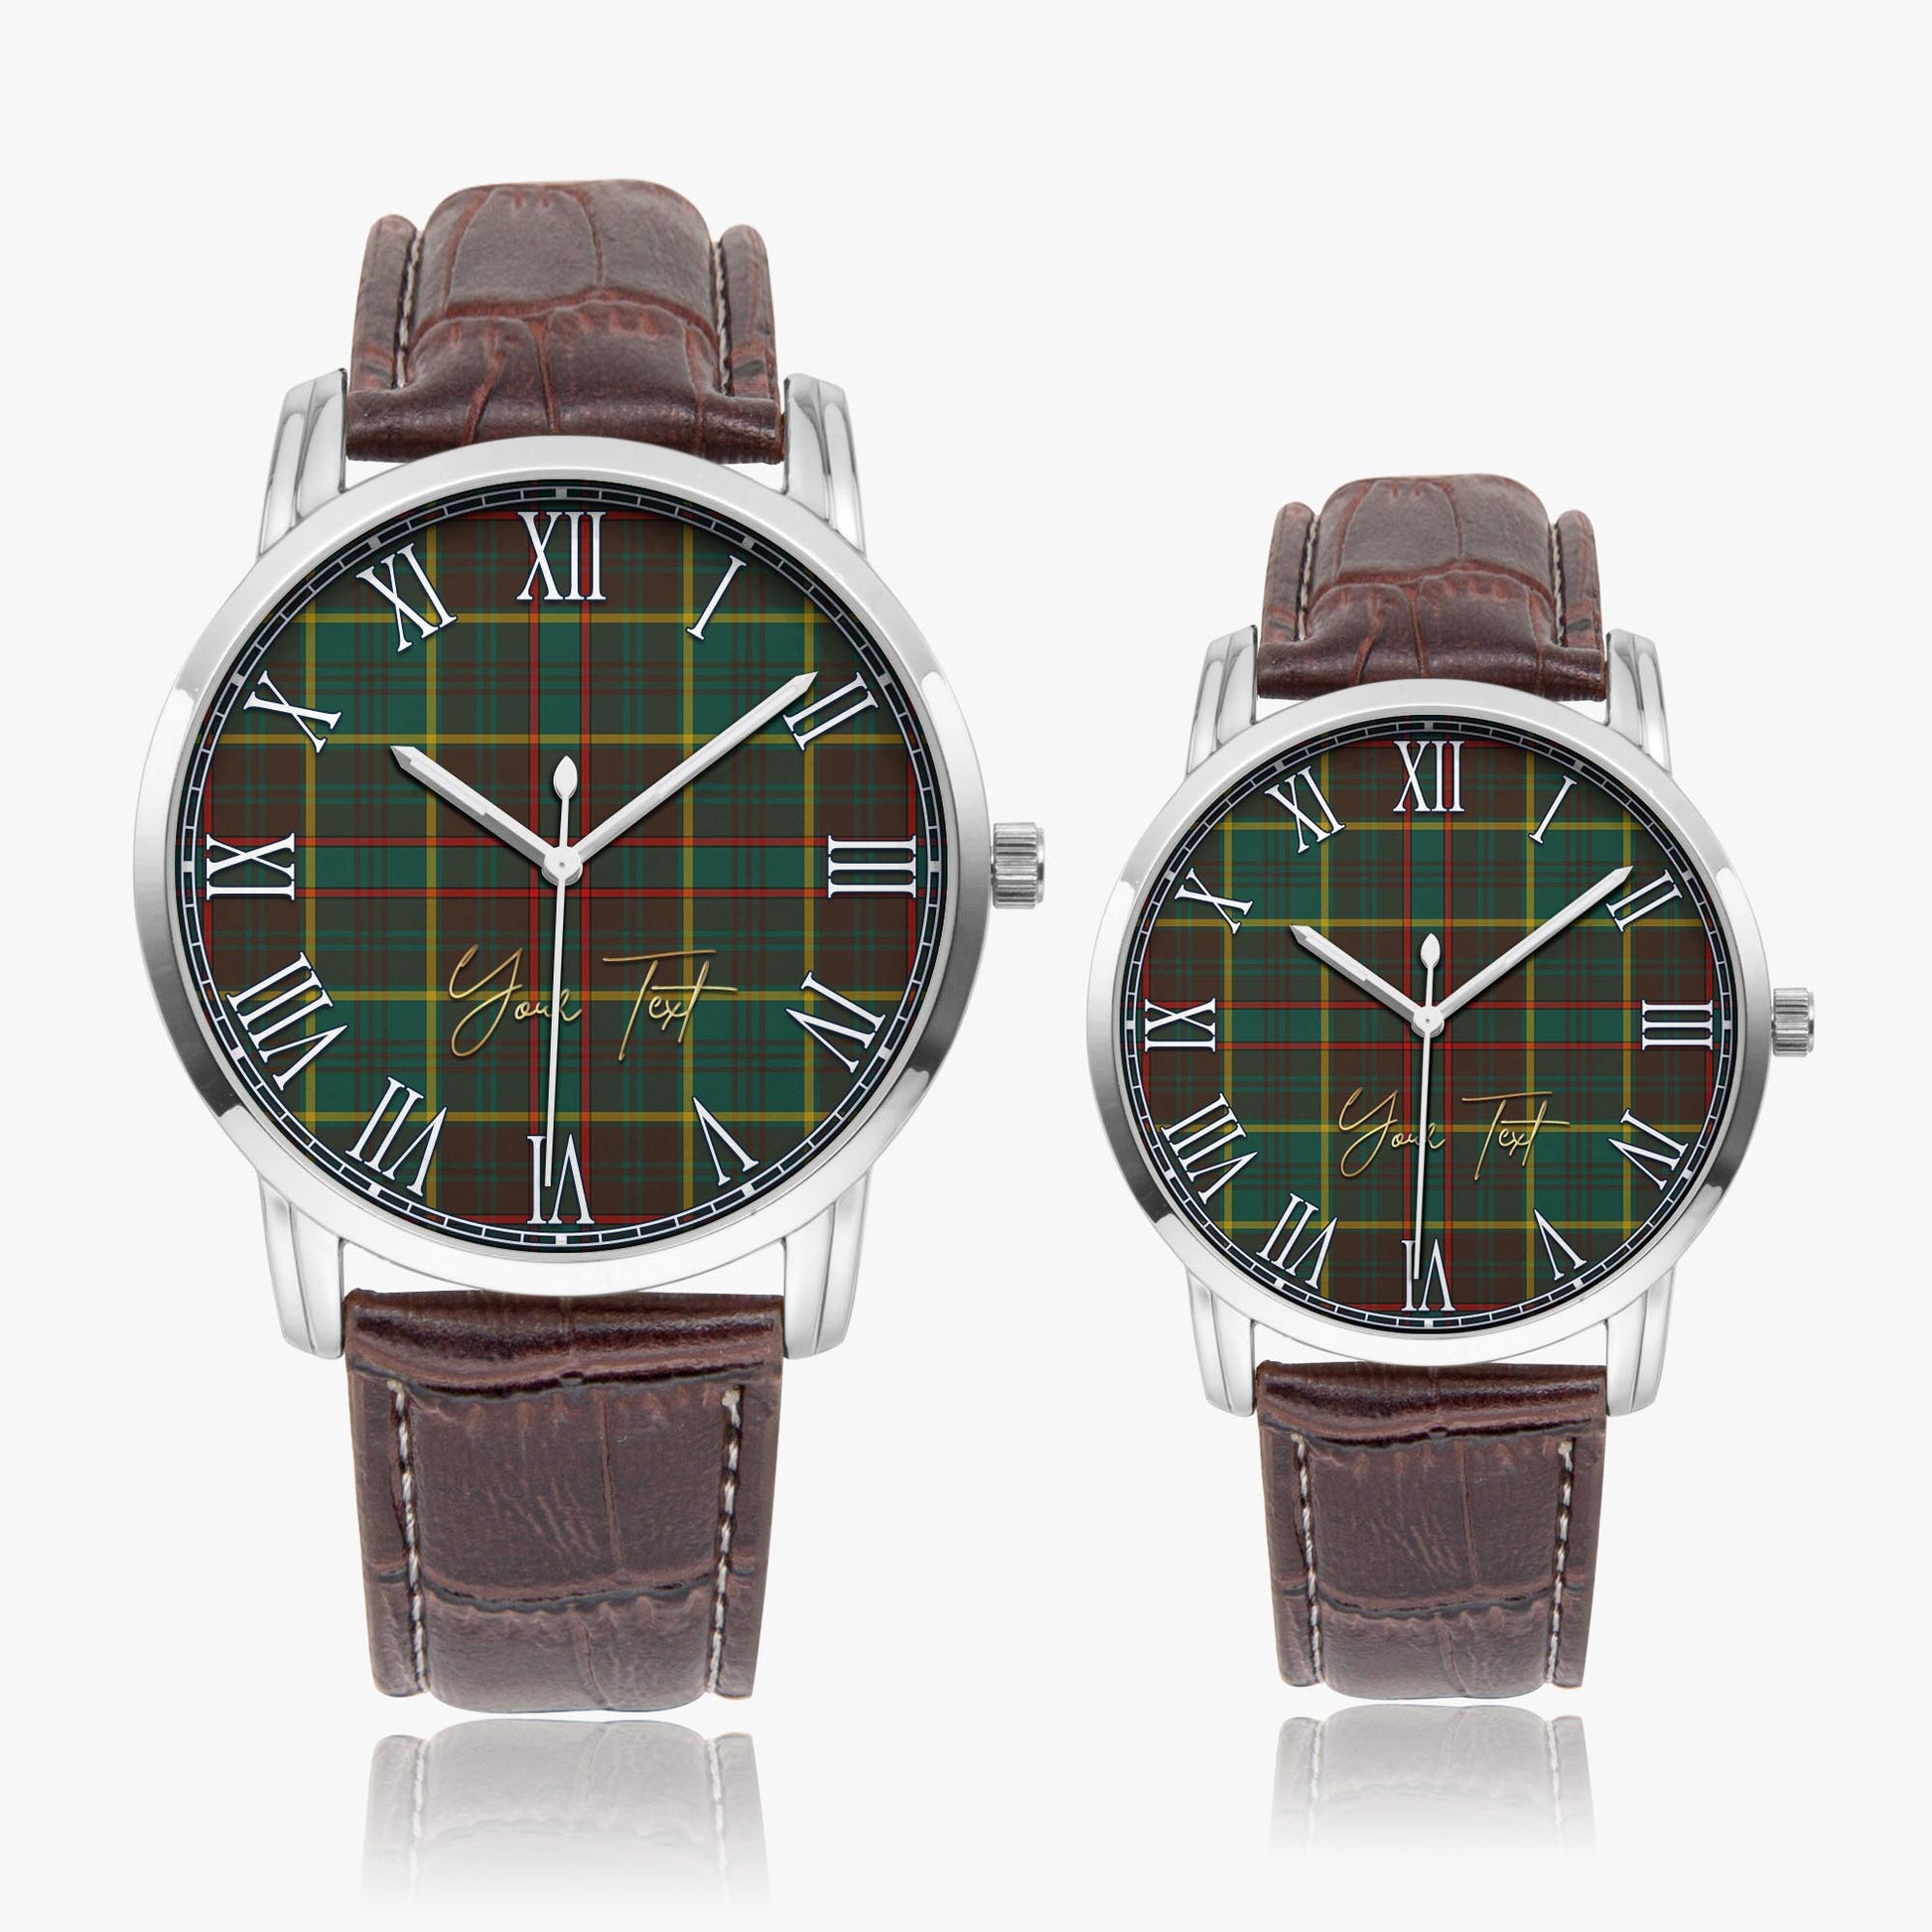 Ontario Province Canada Tartan Personalized Your Text Leather Trap Quartz Watch Wide Type Silver Case With Brown Leather Strap - Tartanvibesclothing